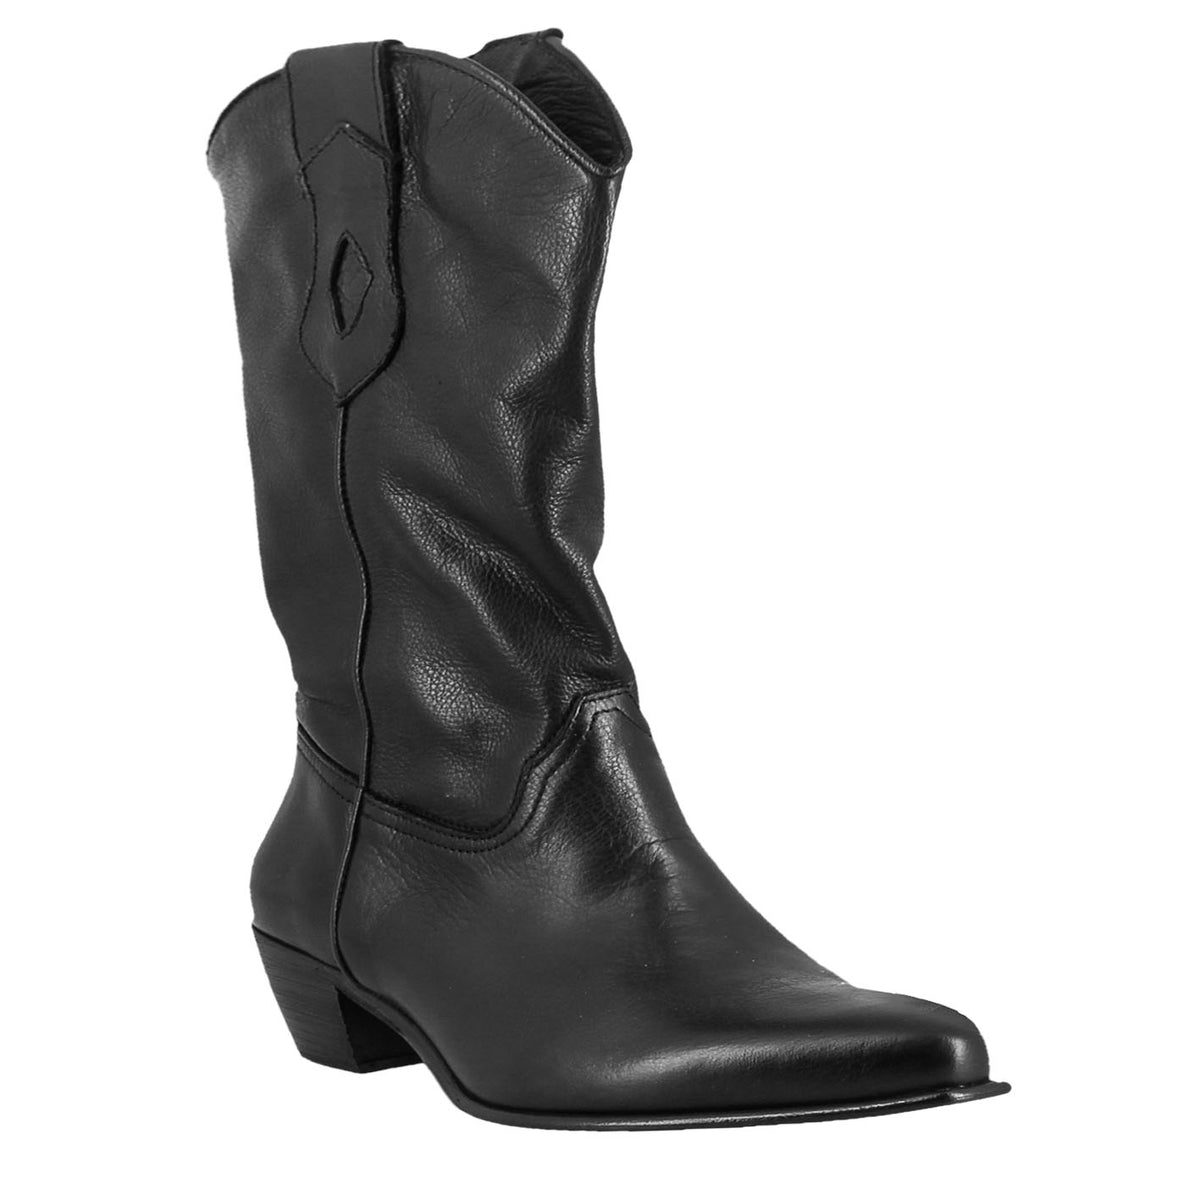 Women's Texan boots unlined in black vintage leather